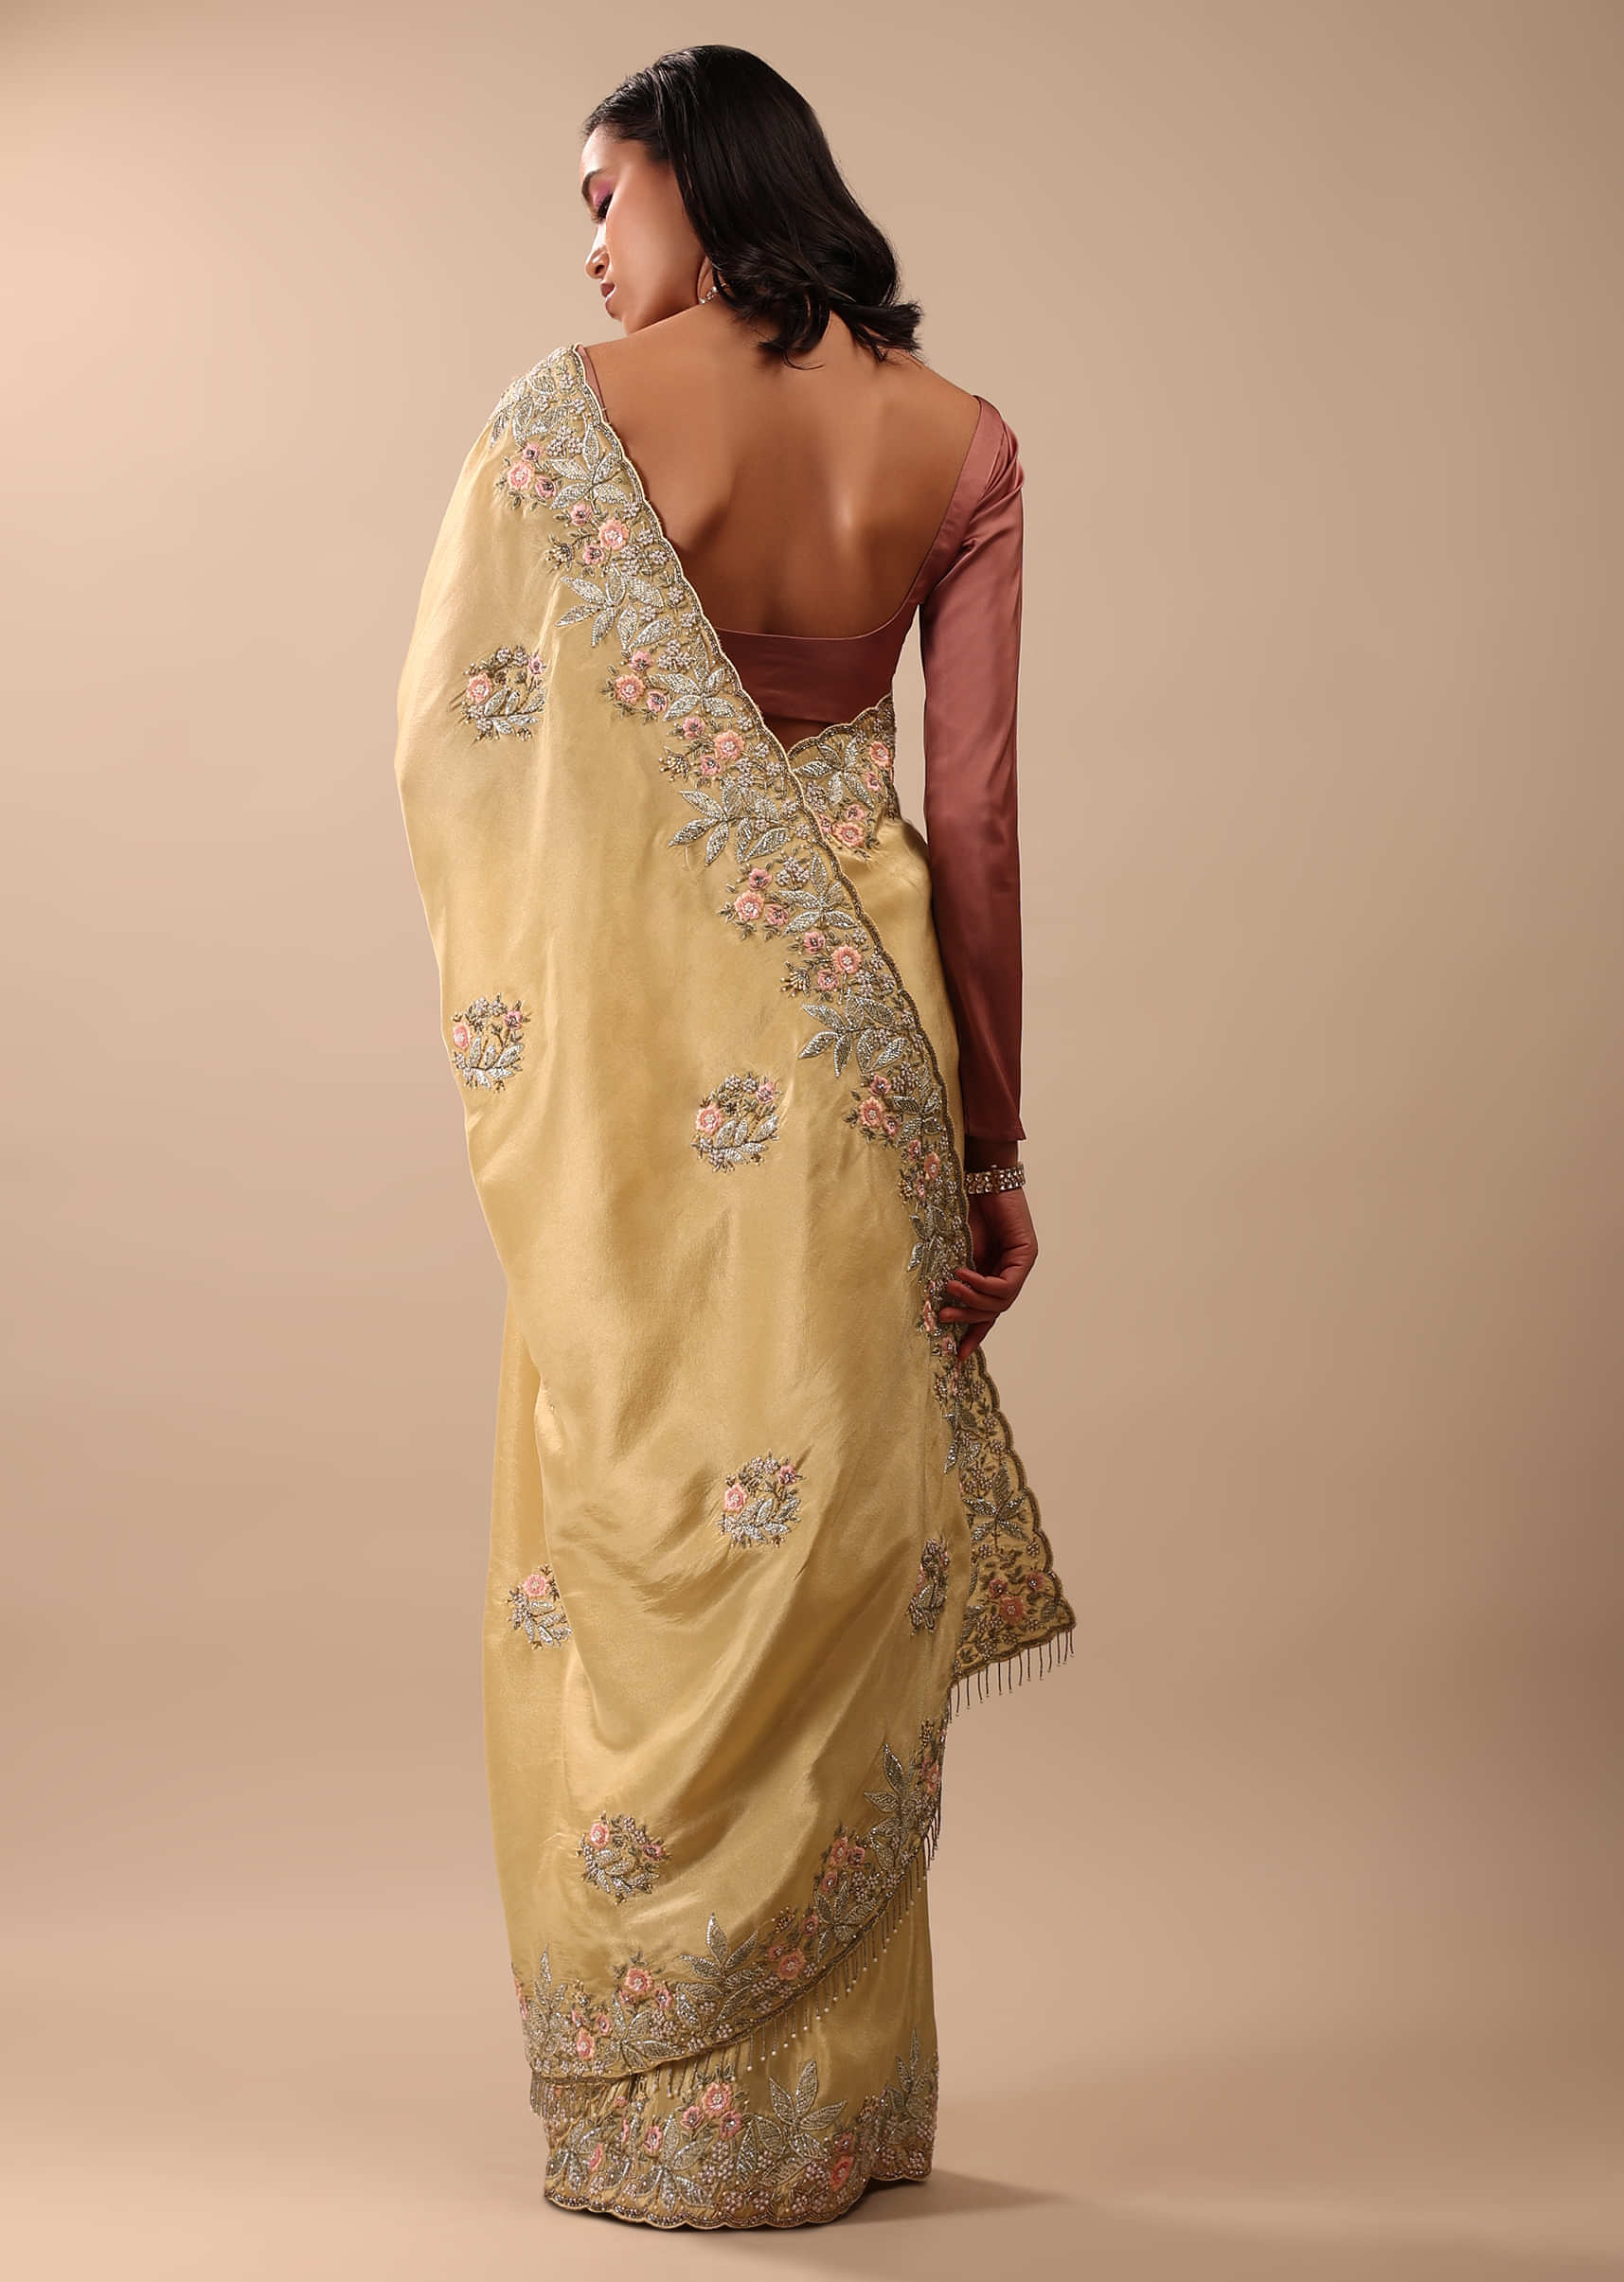 Canary Gold Yellow Saree In Glass Tissue Fabric And Gotta Resham Embroidery With Zardosi, Moti & Sequins